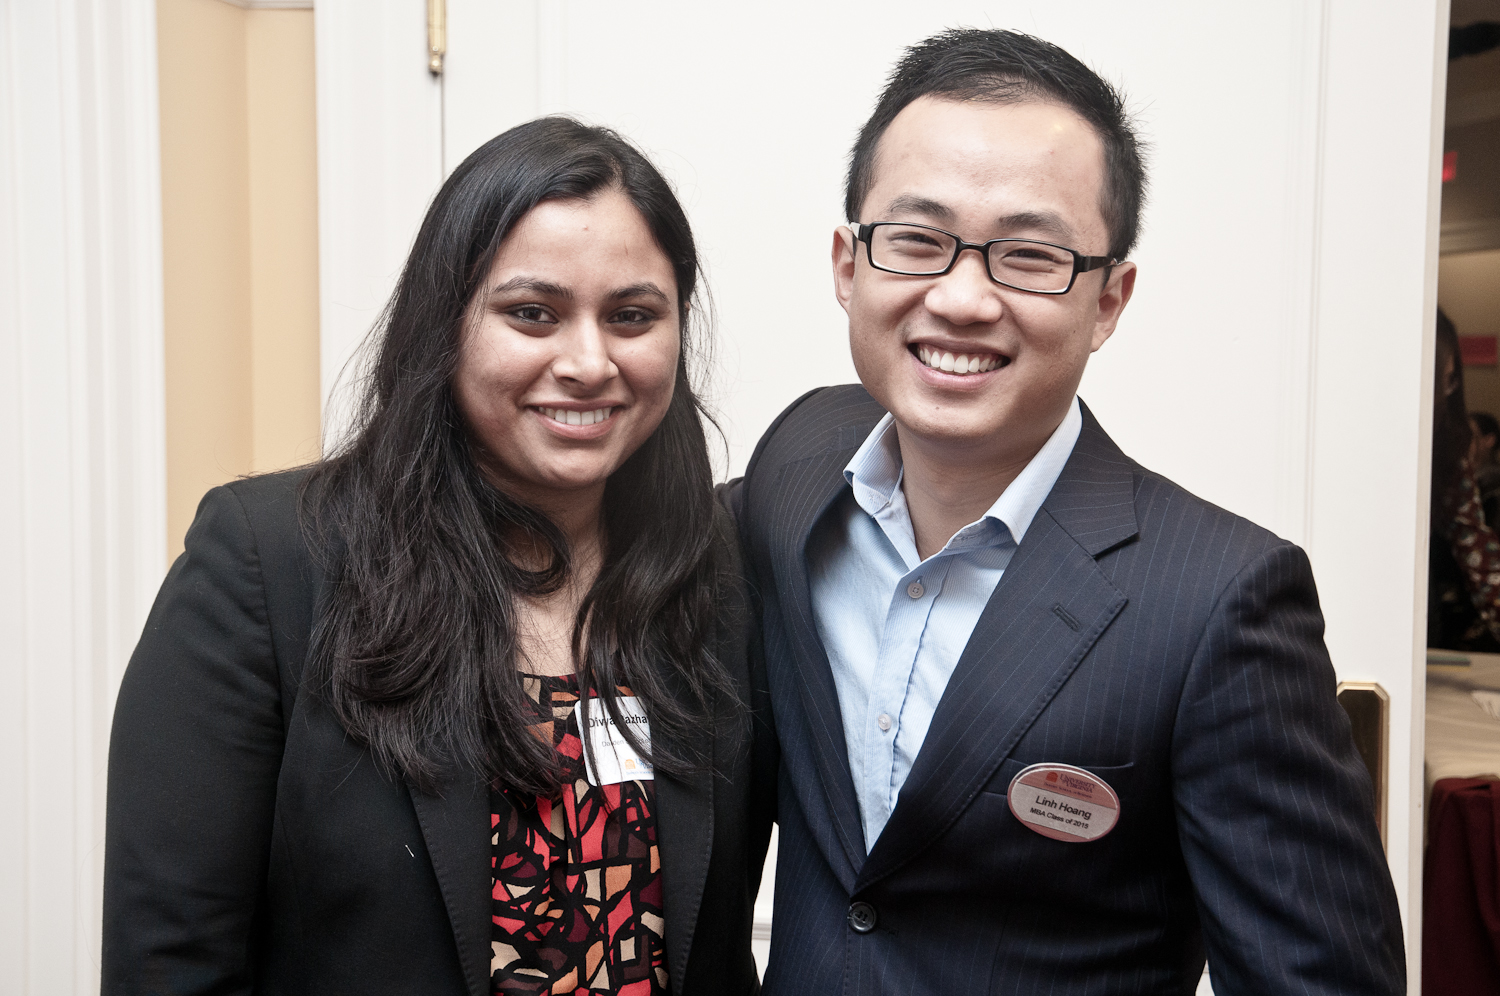 Divya Pazhayannur, President of the Darden South Asia Society, and Linh Hoang, President of the Darden International Business Society, were leaders in the Global Conference planning process and event execution. 